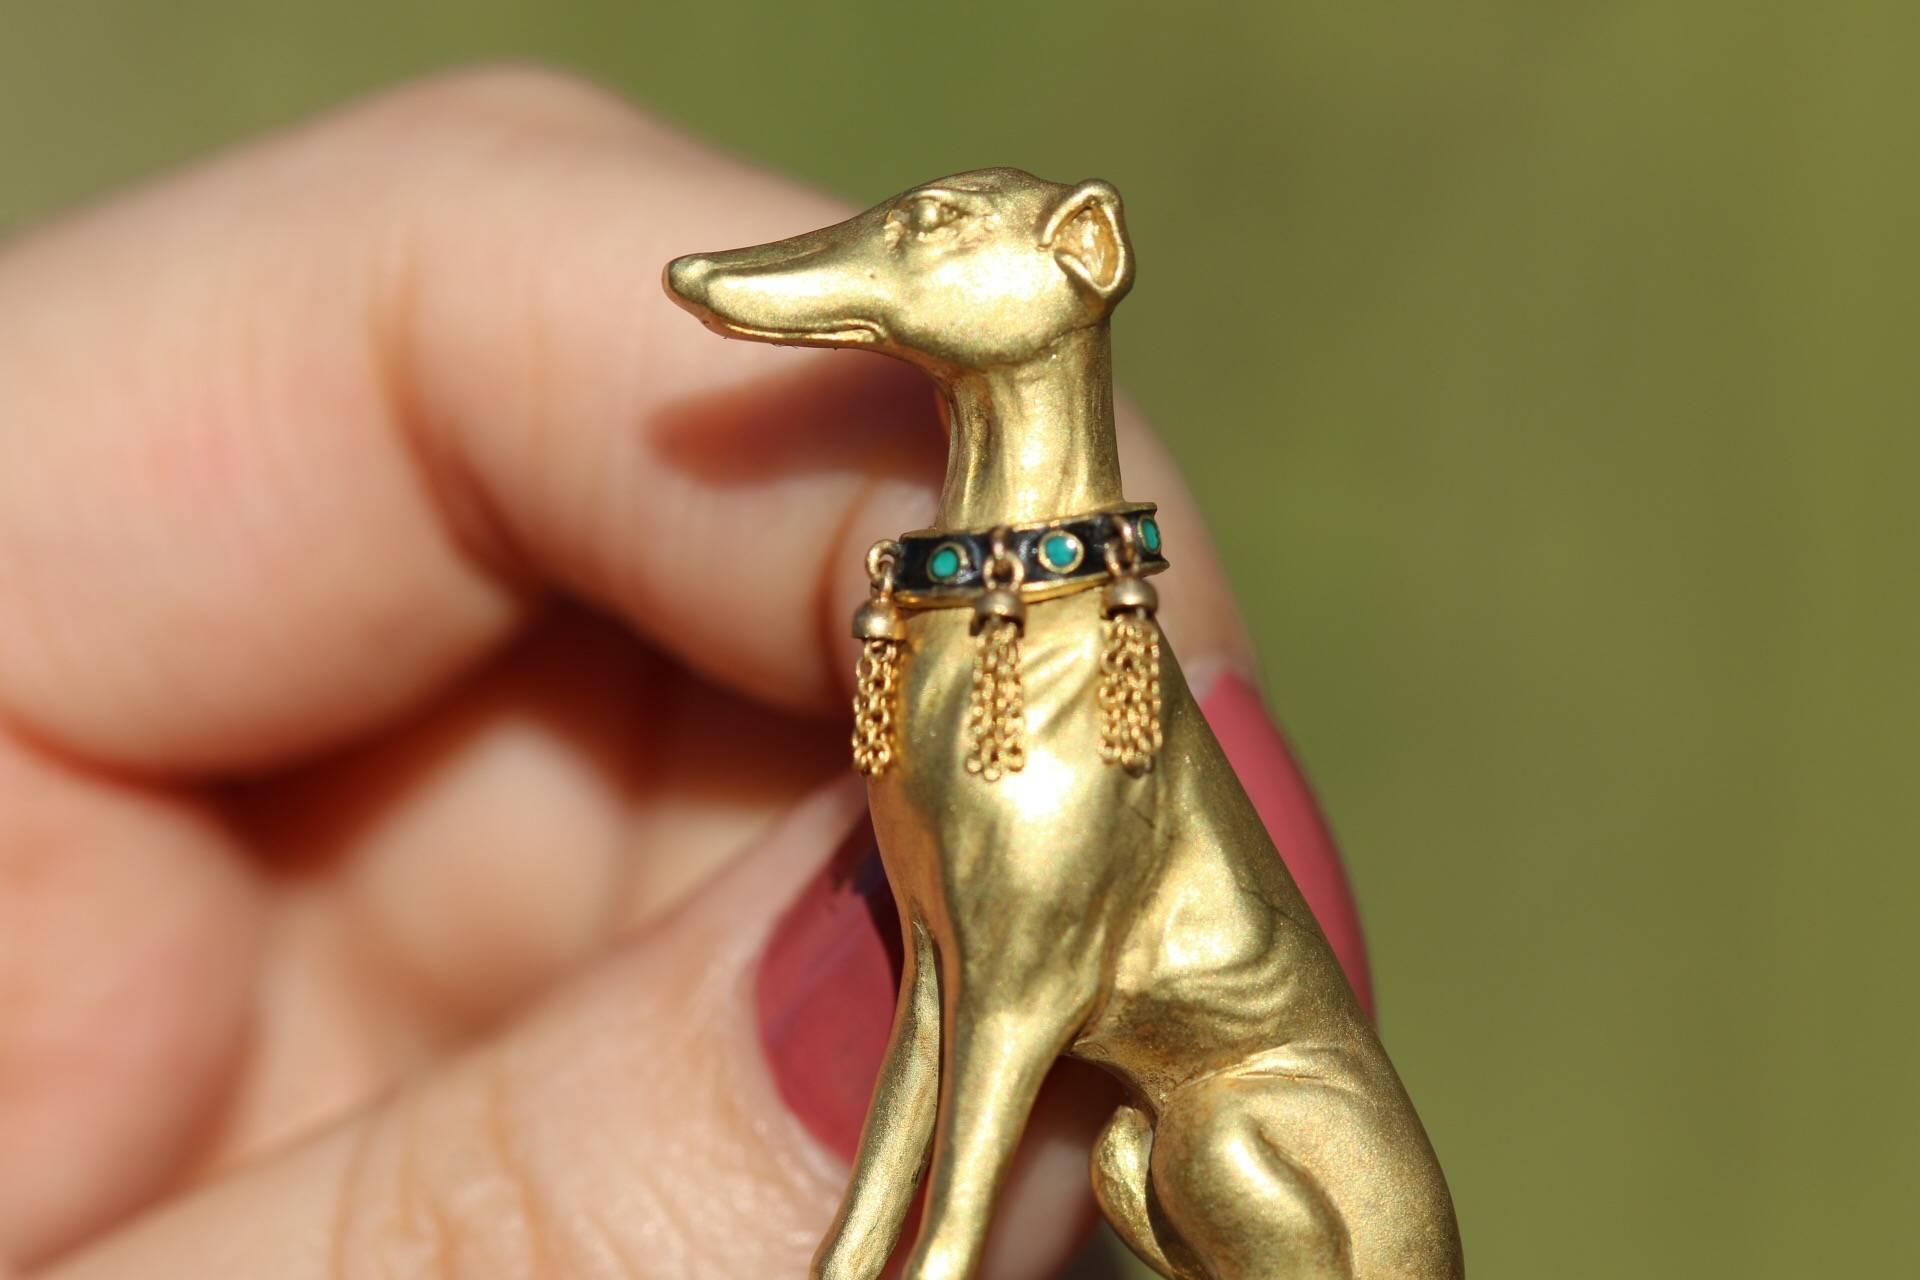 This brooch shows the sleek and elegant form of a greyhound sitting on a platform lined with diamonds over an Art Nouveau inspired flourish of flowing gold. Below the platform are suspended three pear-cut emeralds. The Greyhound is wearing a collar